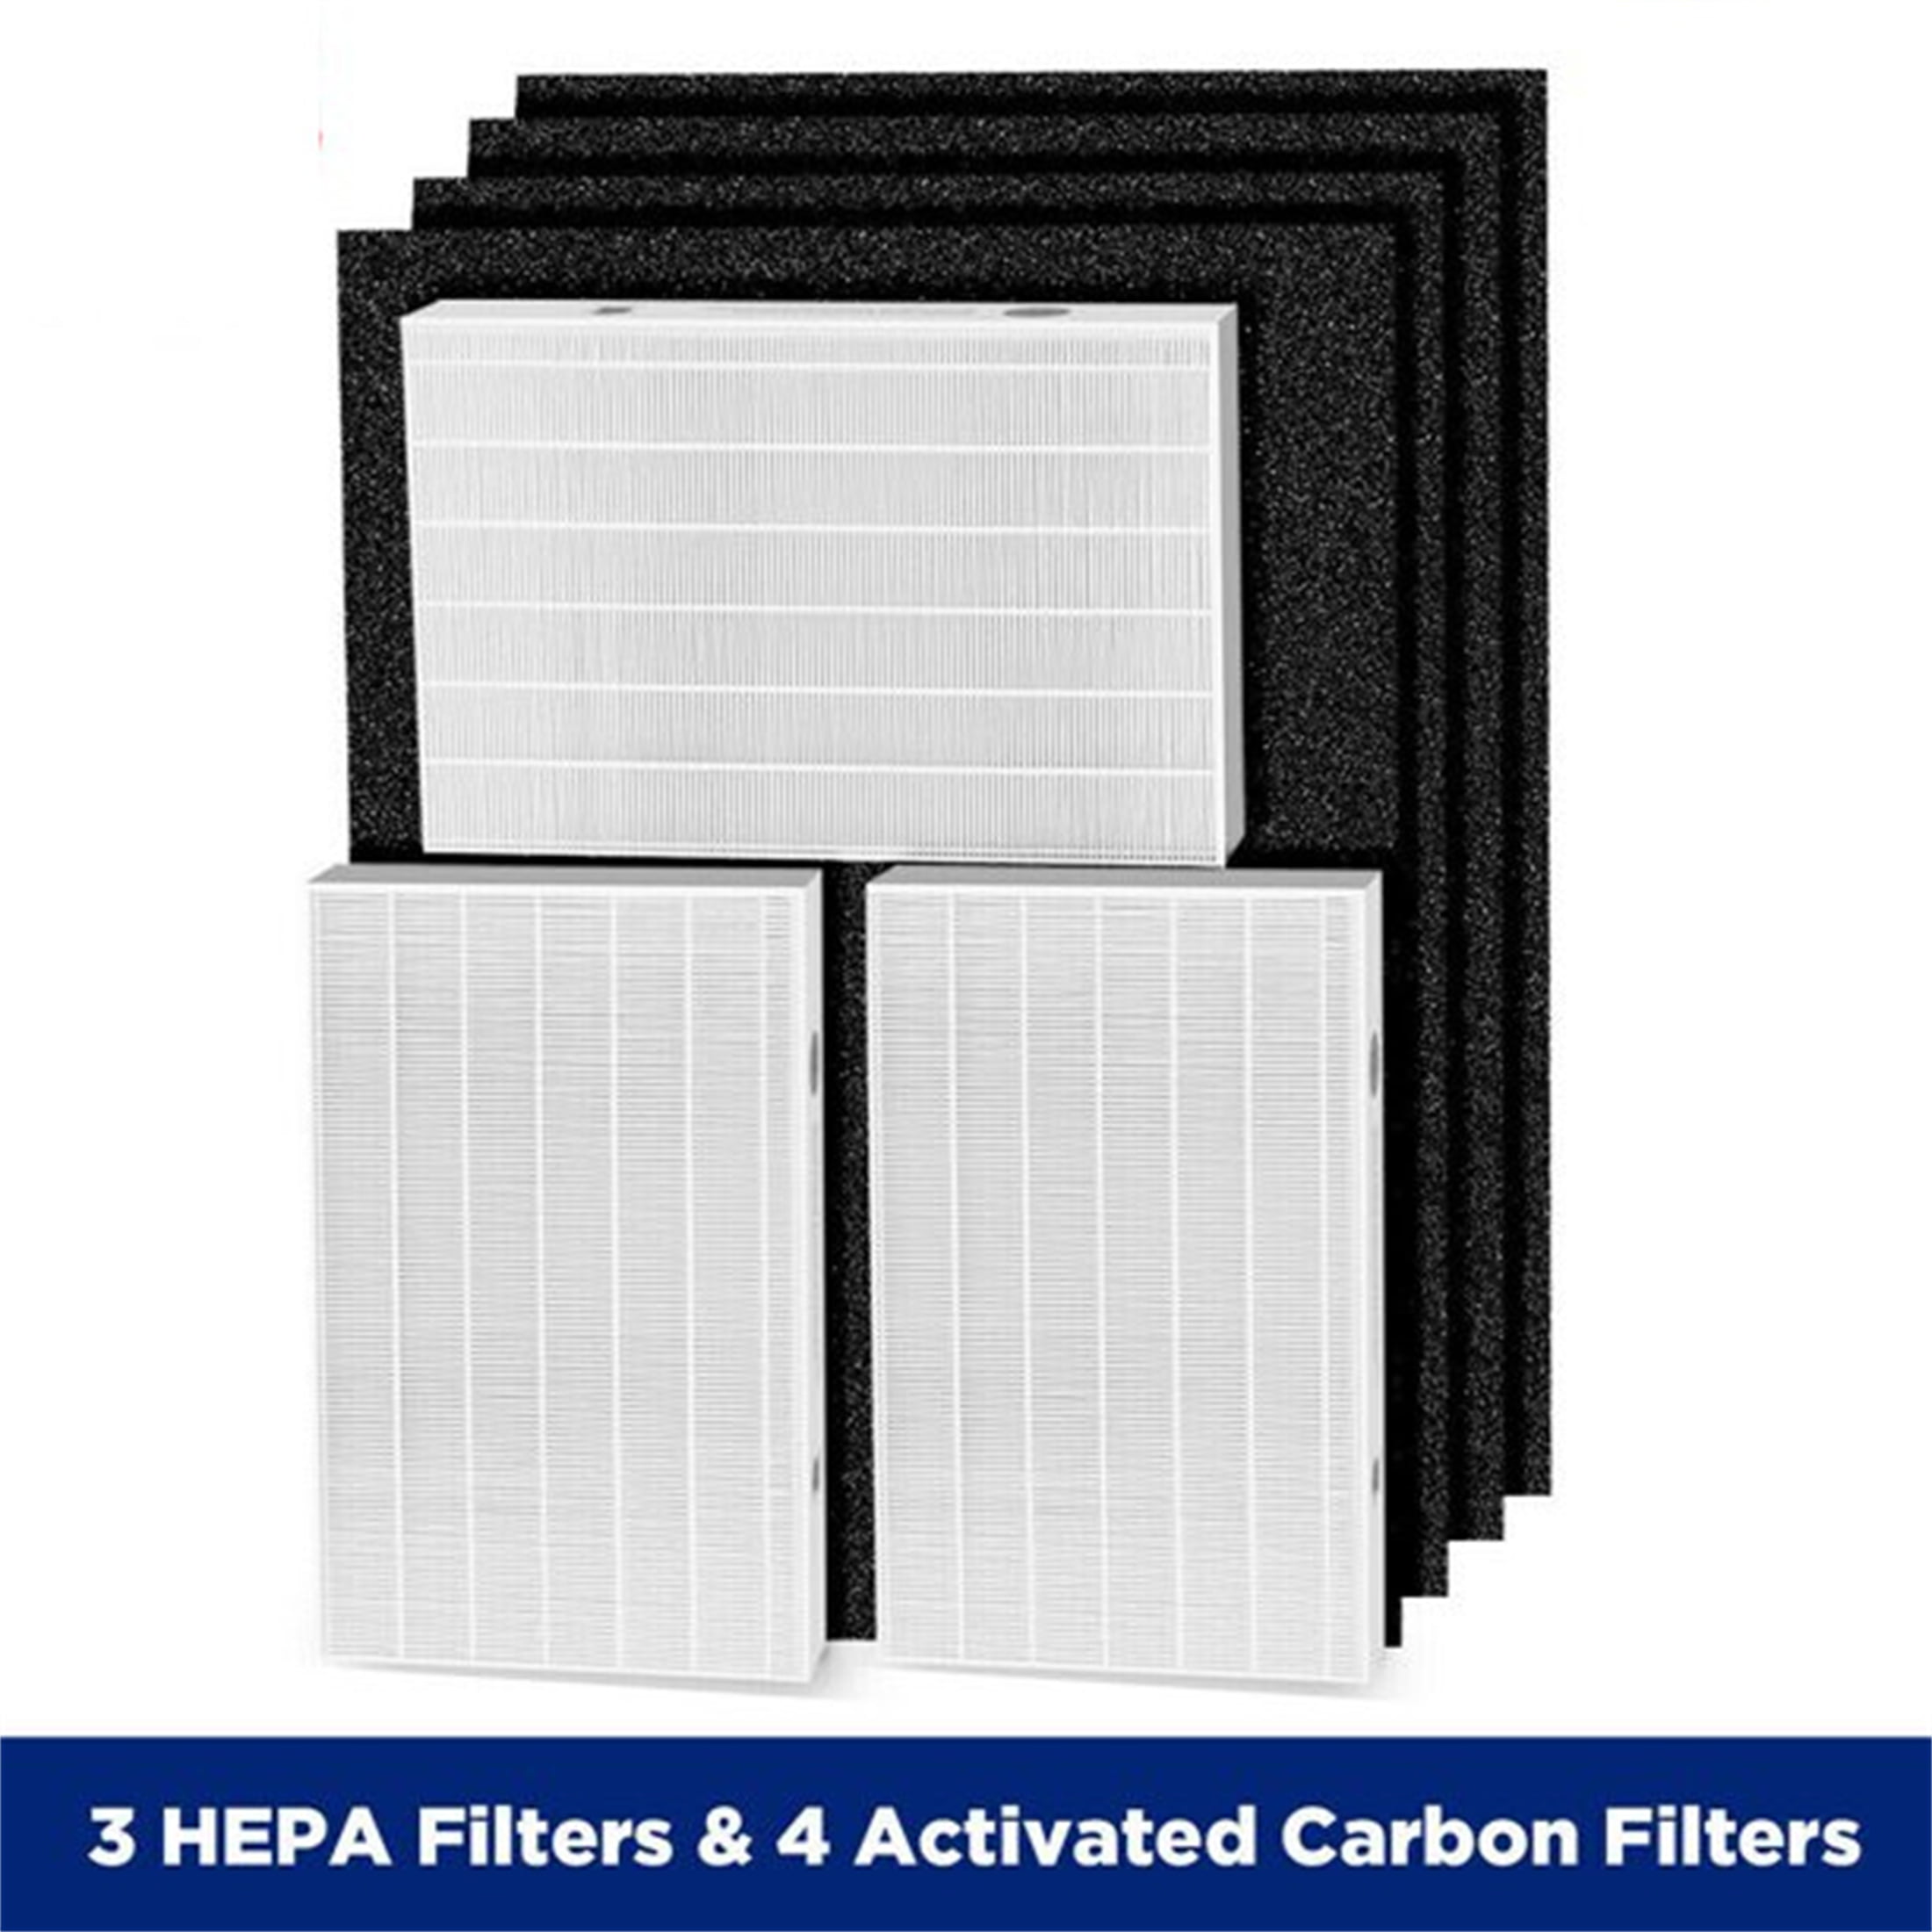 2 Compatible to Honeywell 32002 Charcoal Pre-Filter 6"x48" Pack ByCFS 